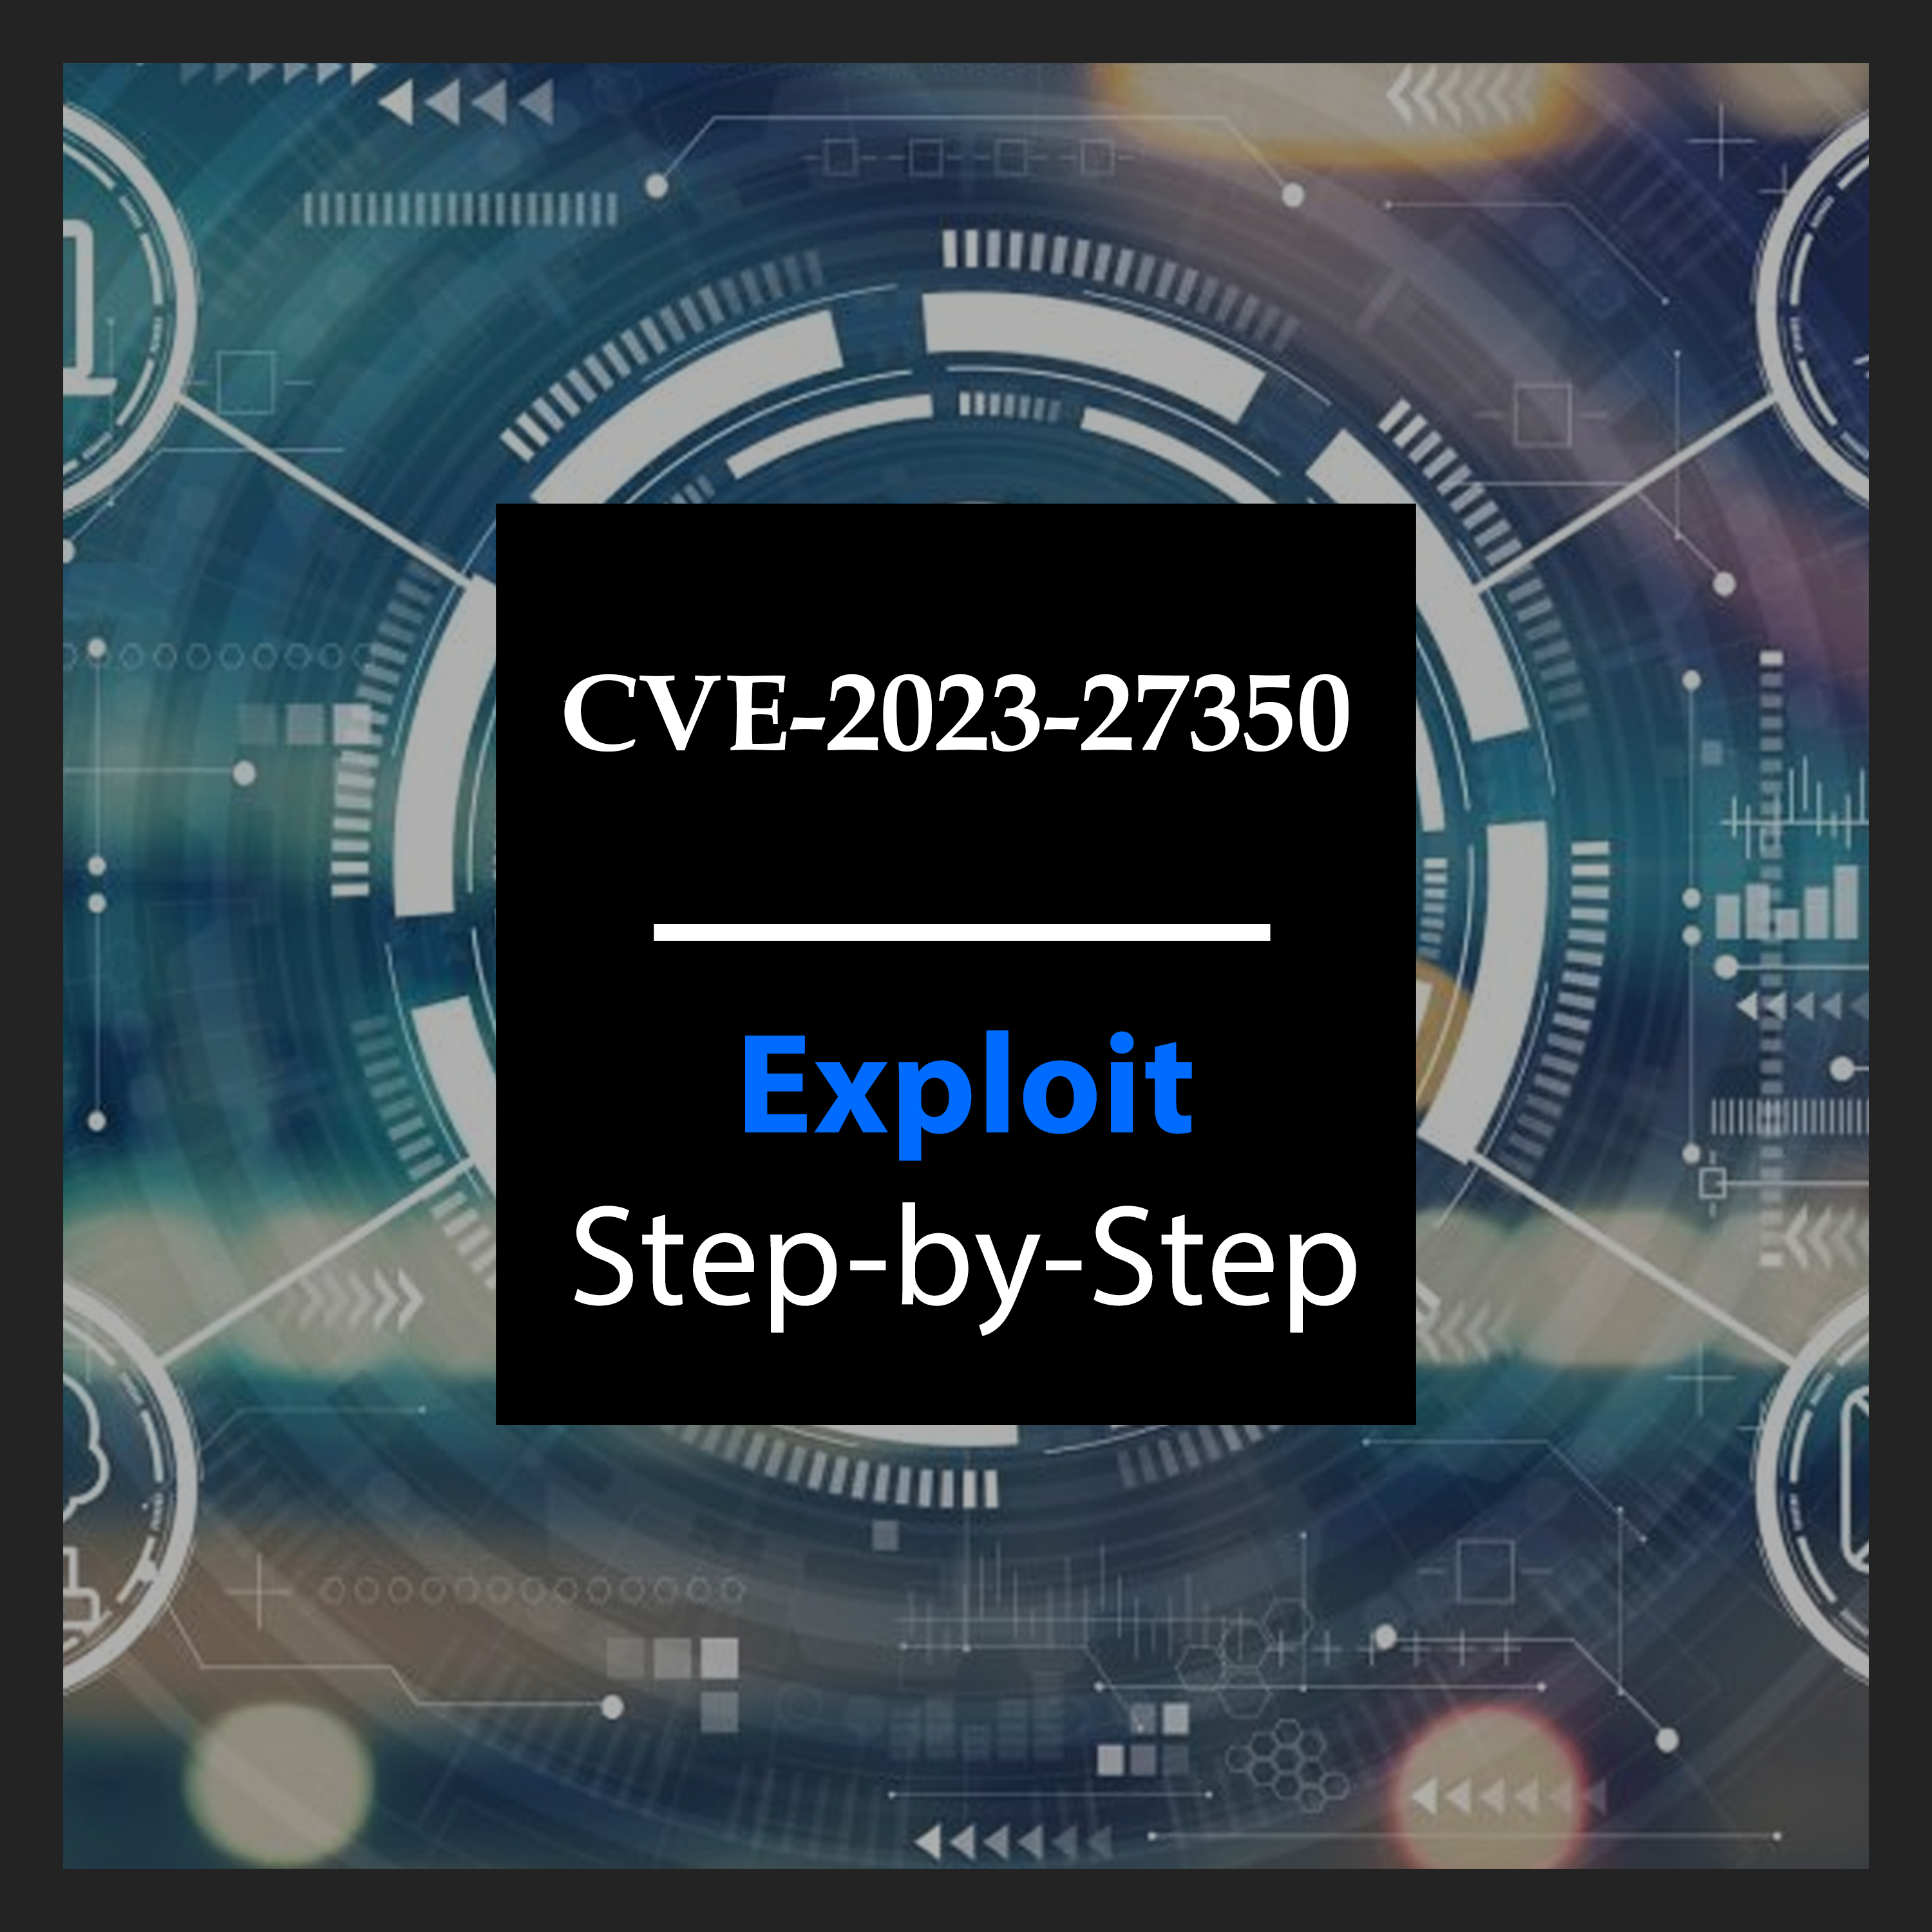 CVE-2023-27350: An Authentication Bypass Vulnerability in PaperCut MF/NG